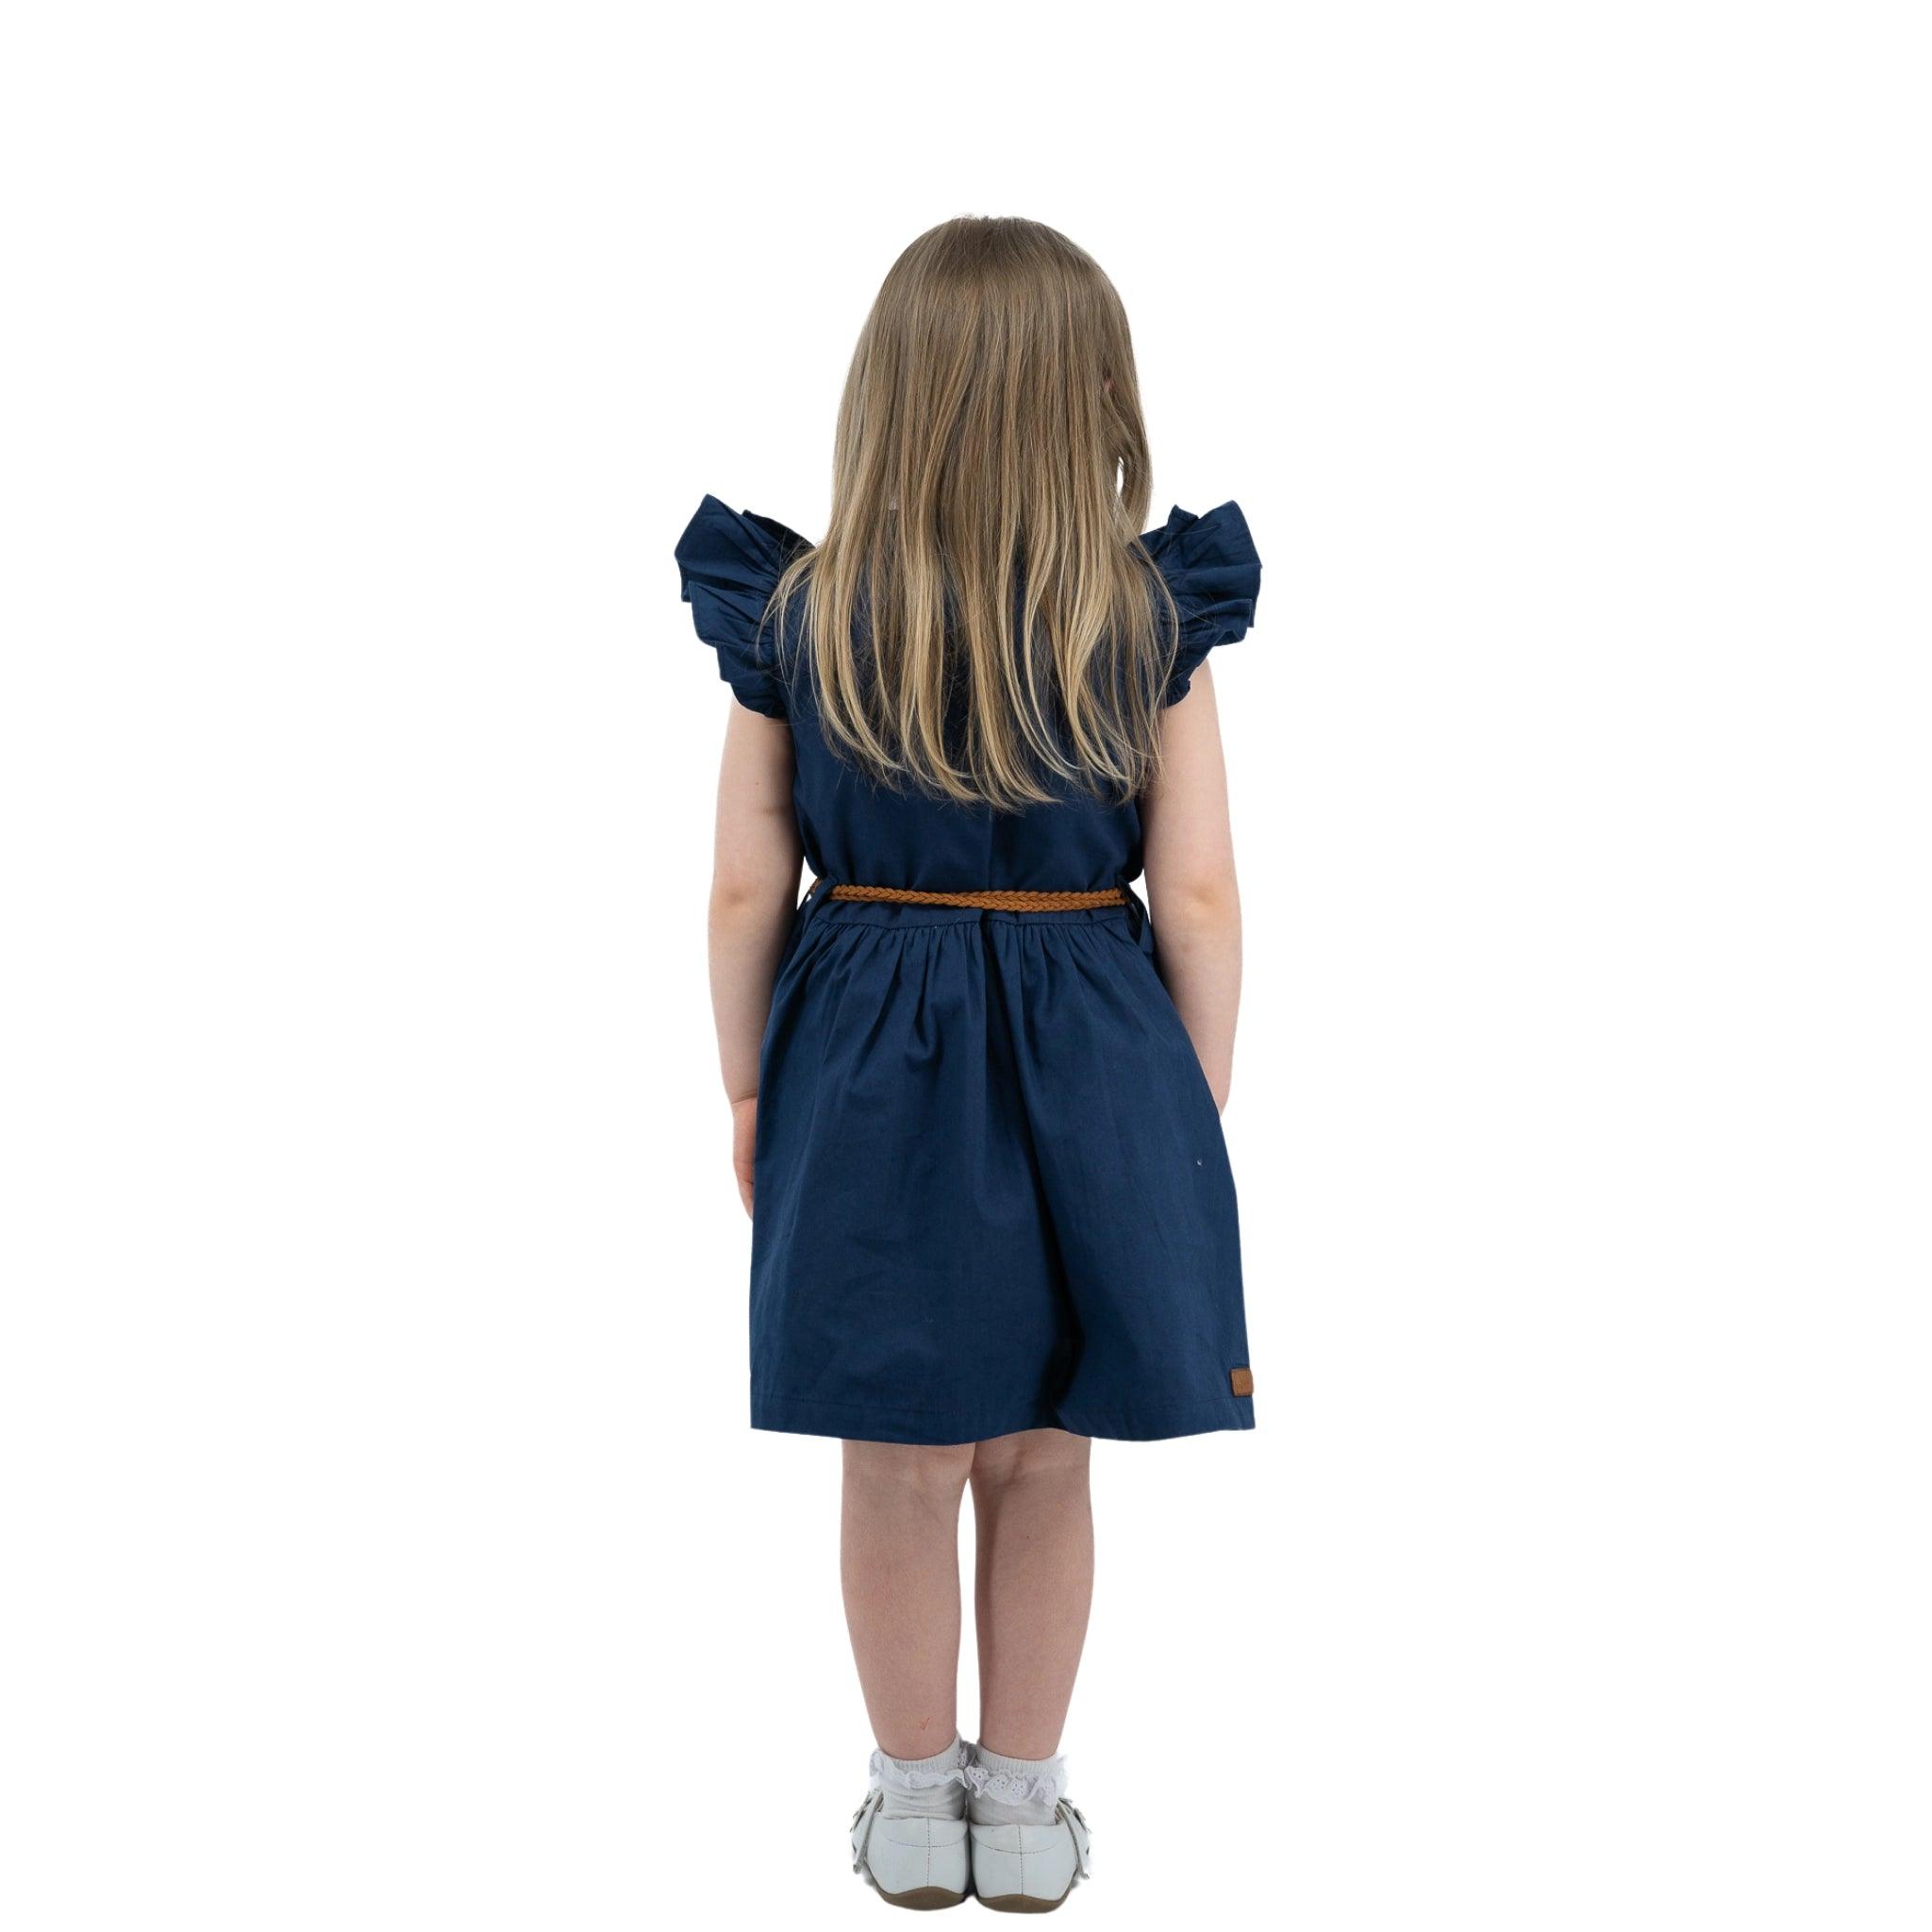 Young girl in a Karee Navy Blue Butterfly Sleeve Cotton Dress with an orange belt, seen from the back, standing against a white background.